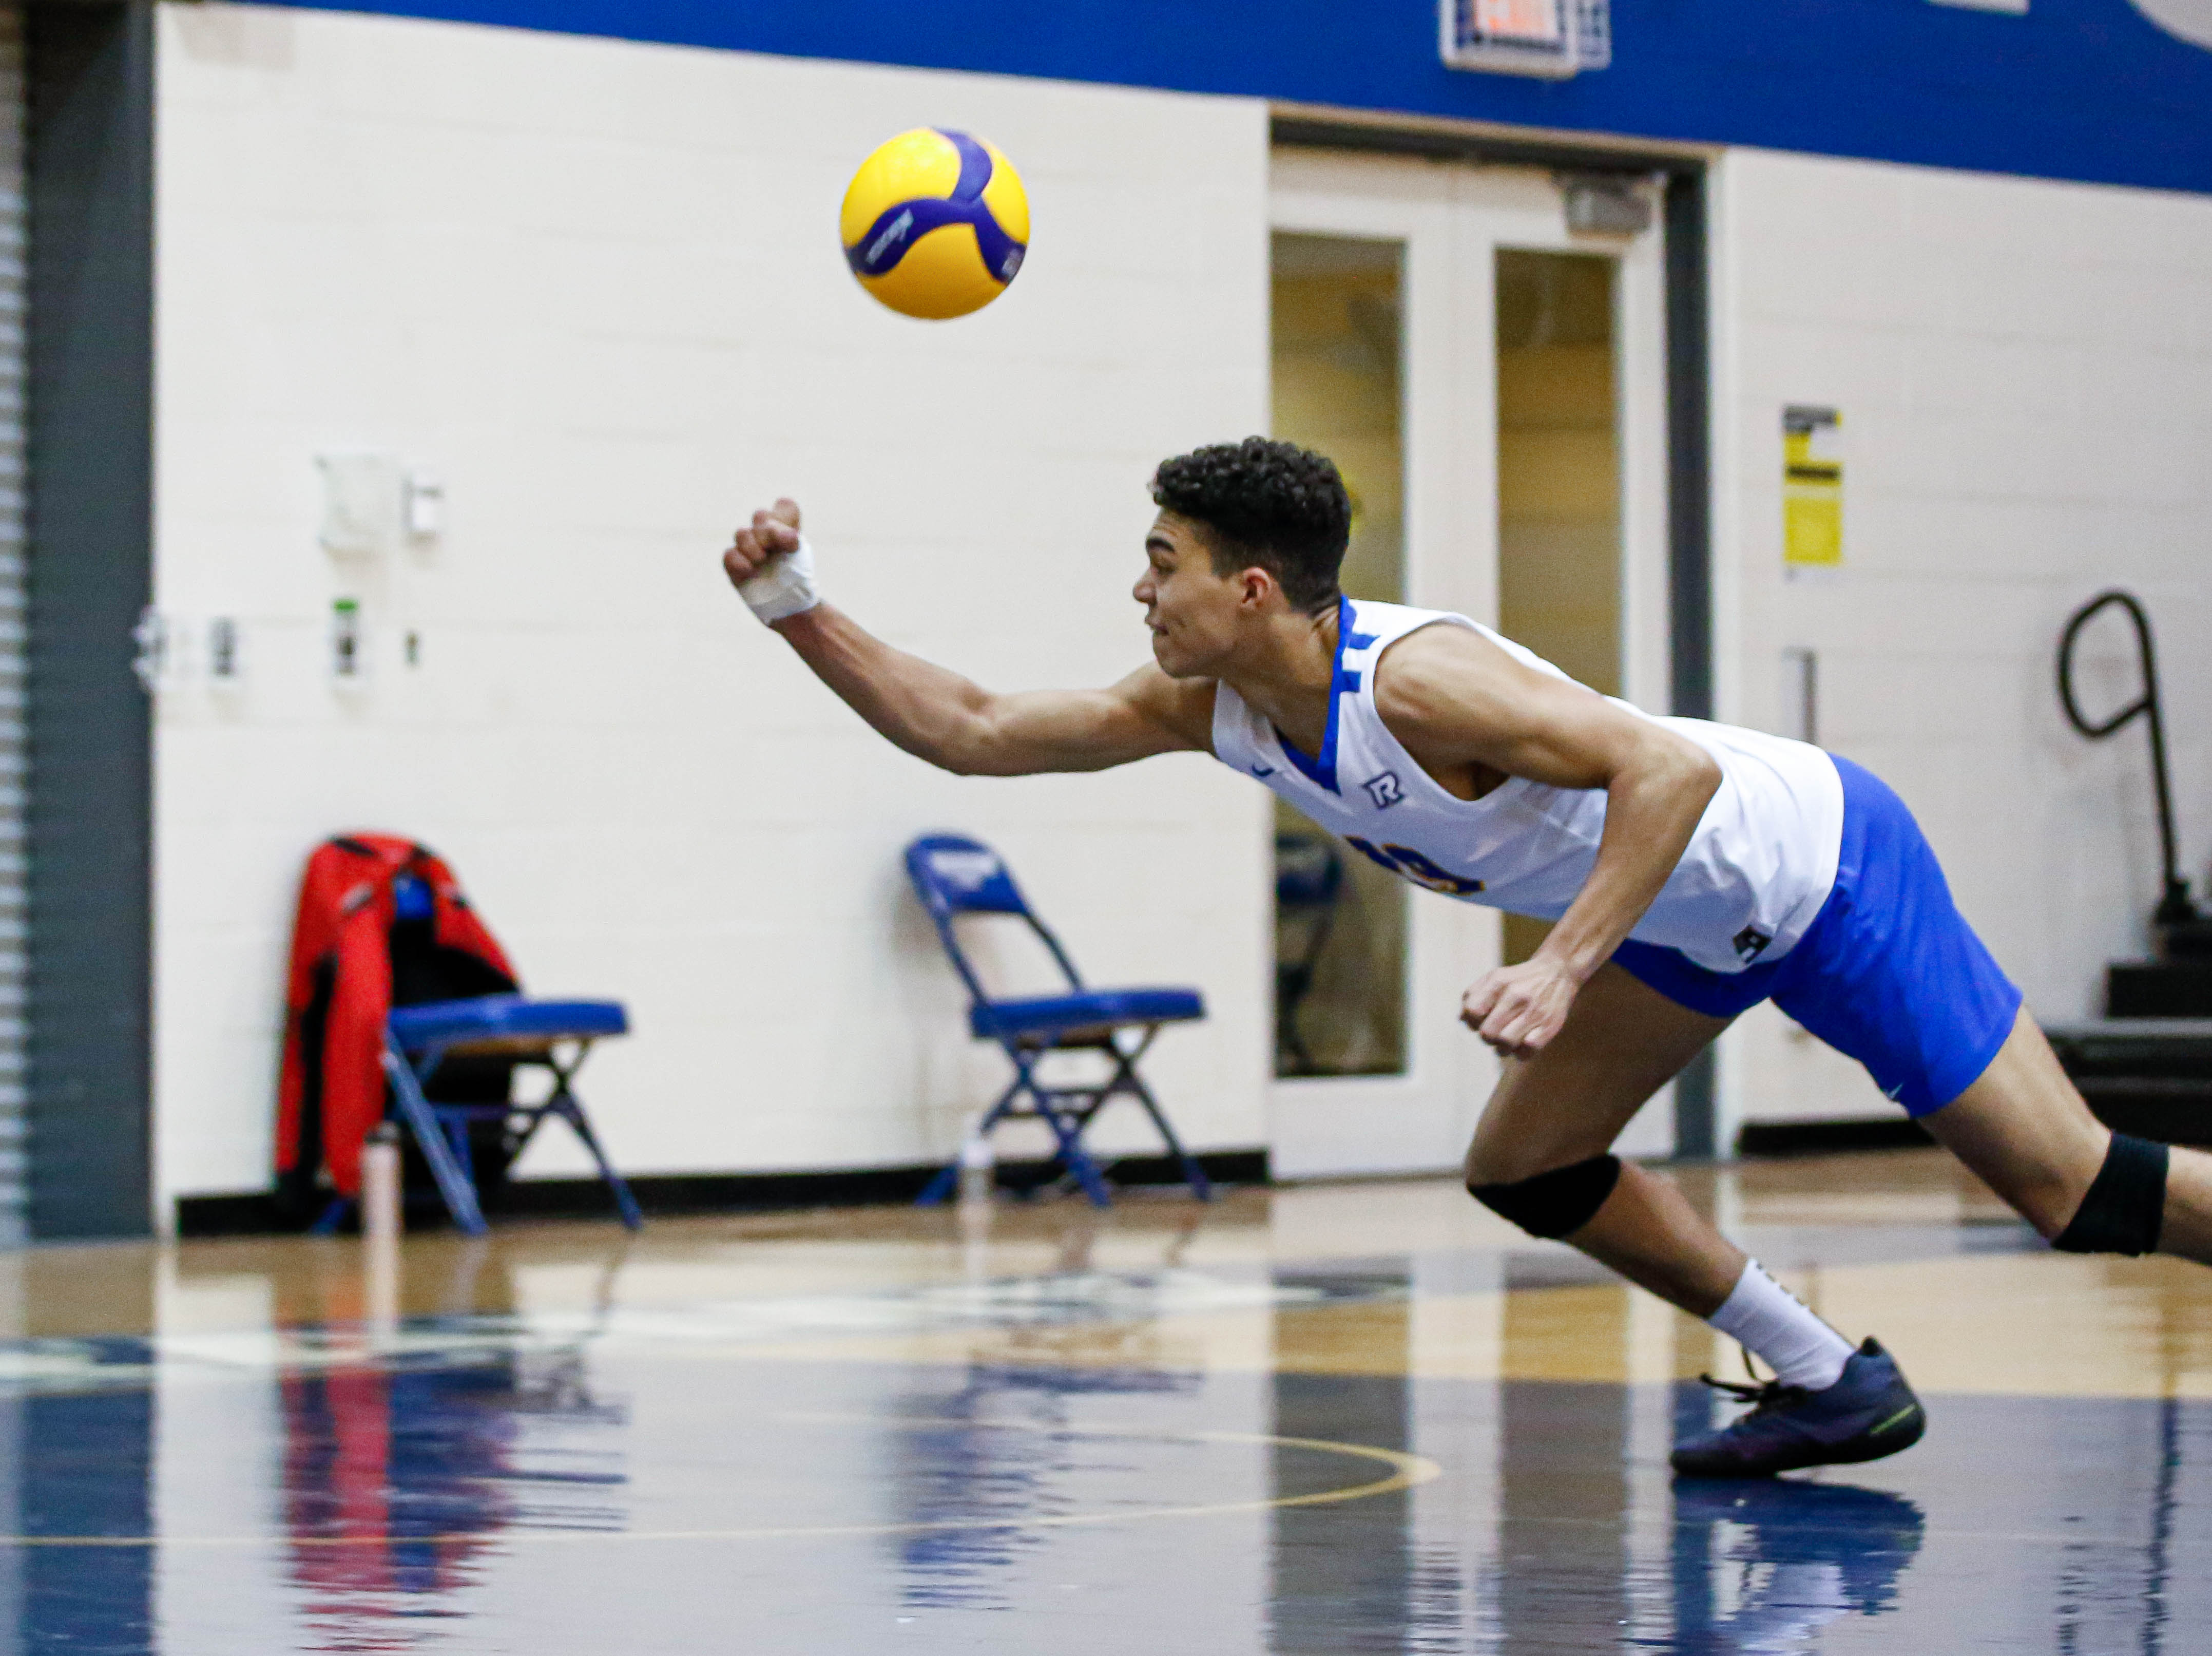 A volleyball player lunges with an outstretched fist attempting to bump a volleyball